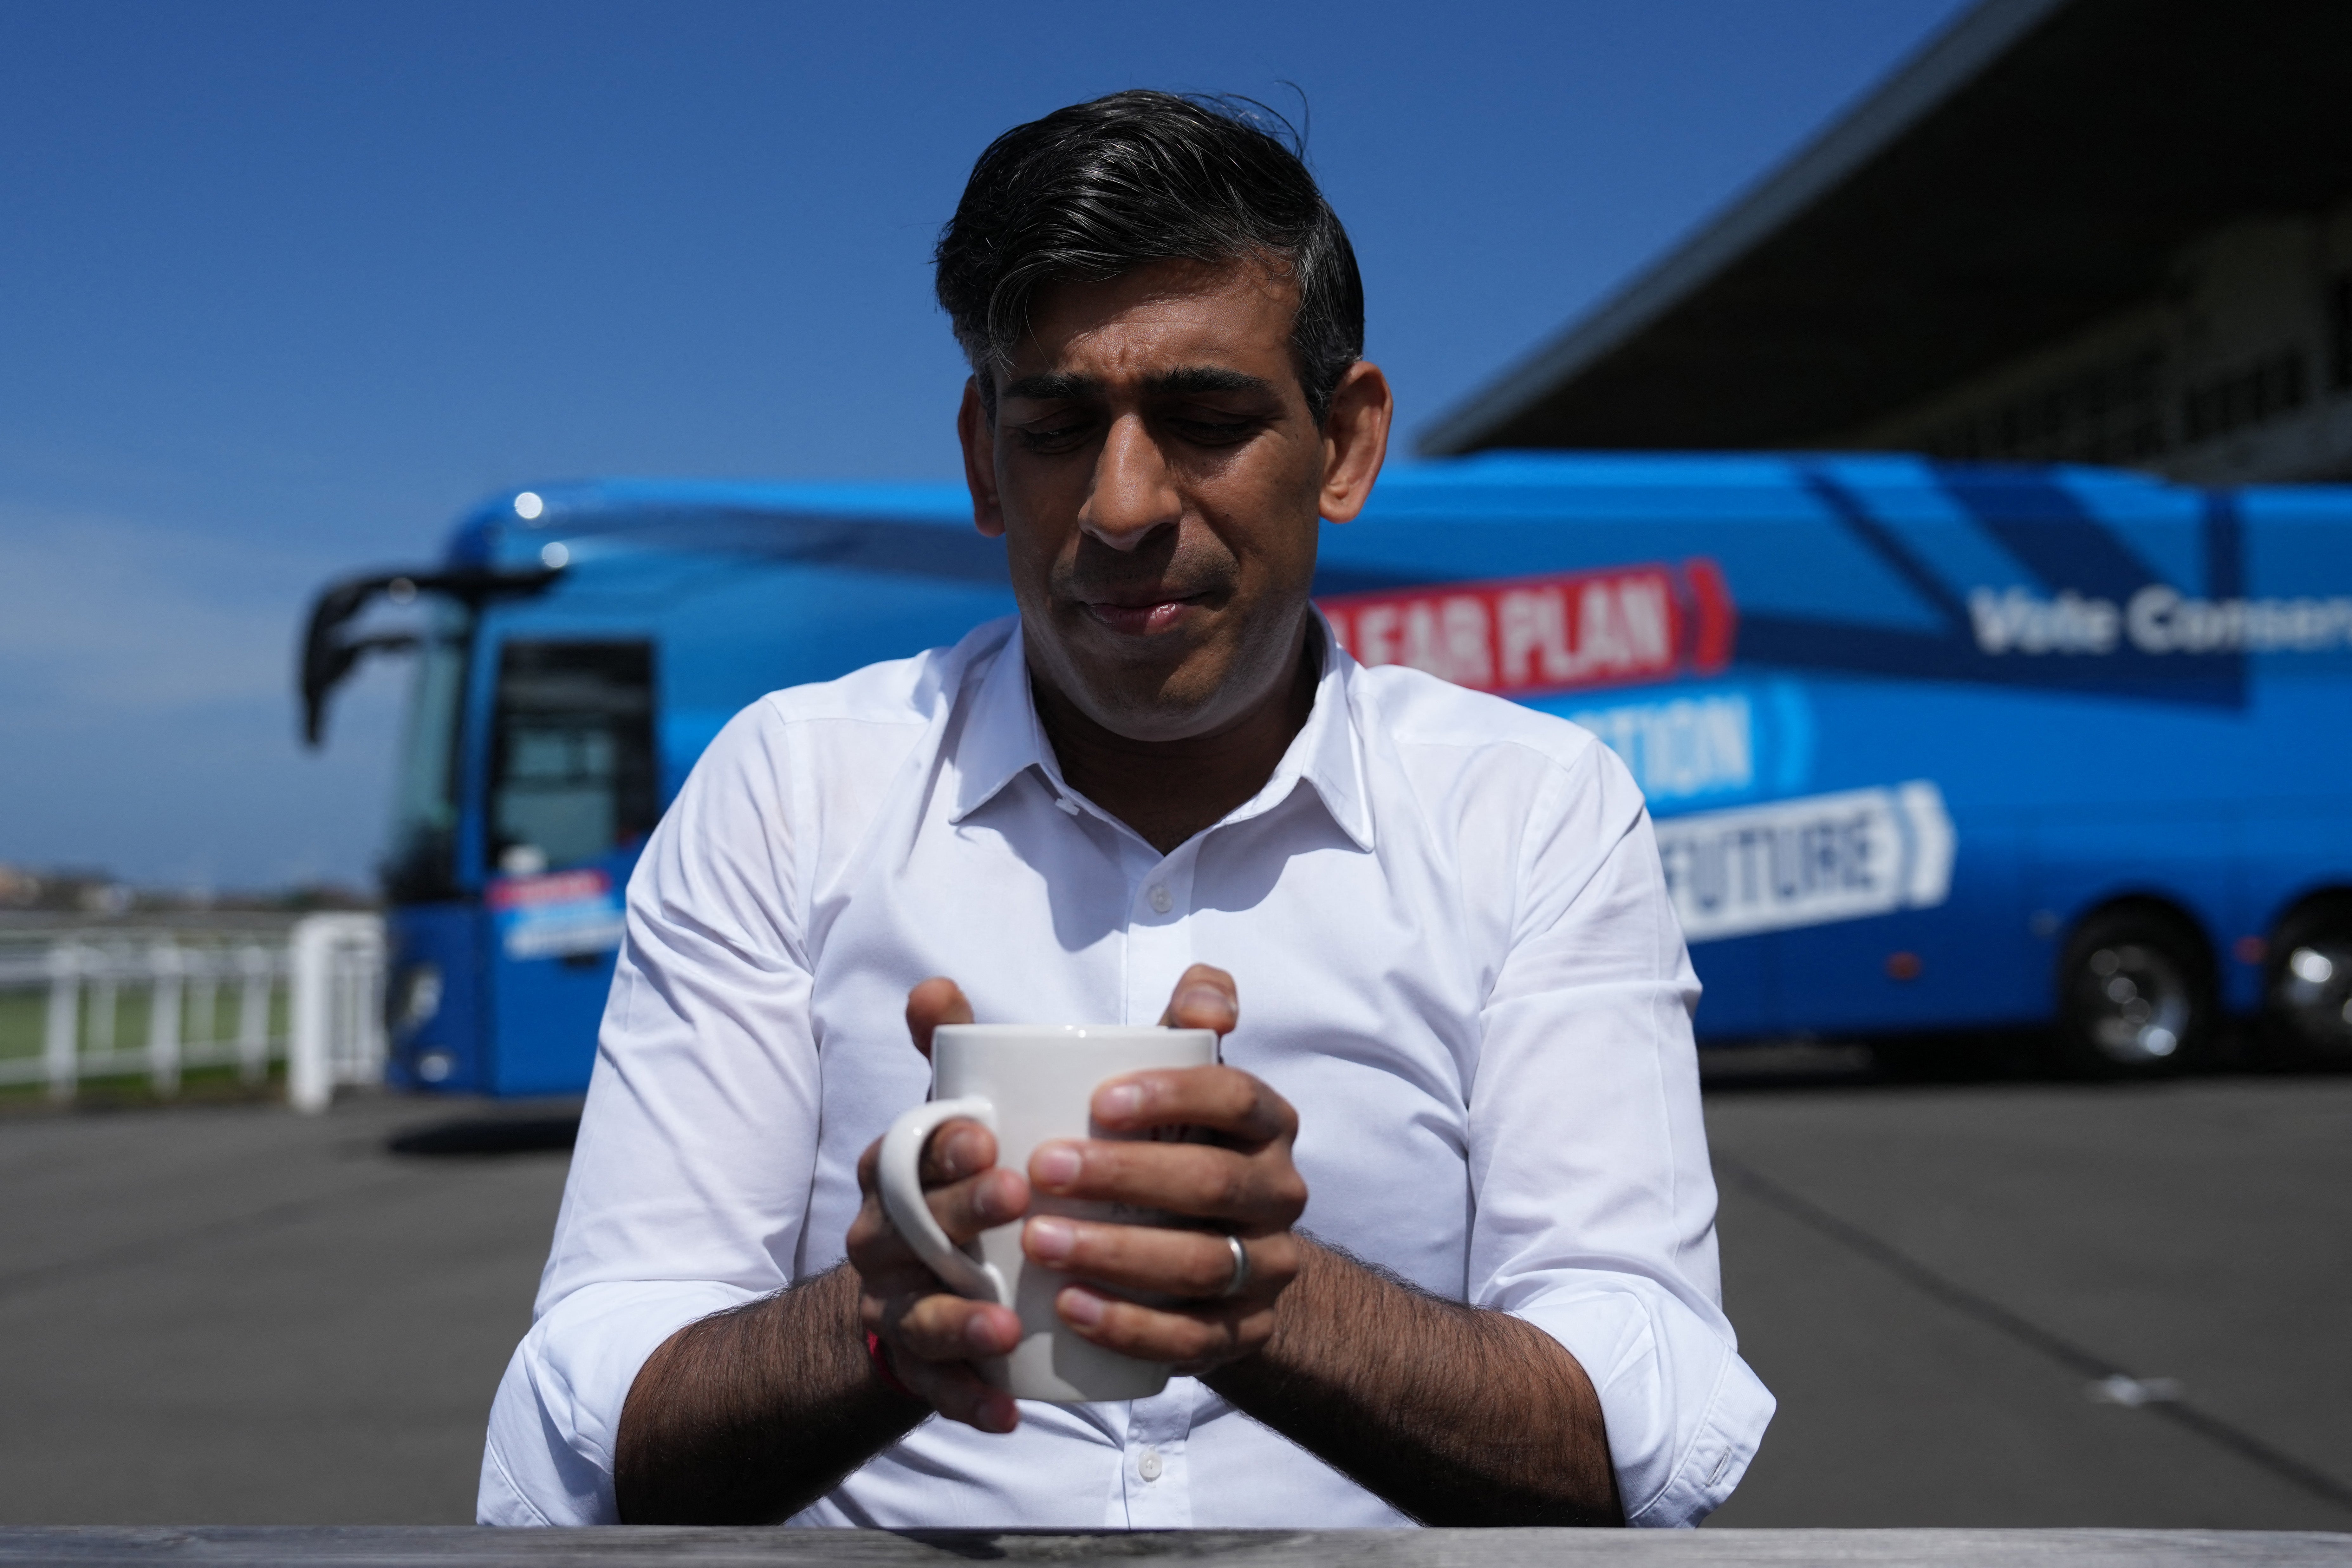 Britain's Prime Minister and Conservative Party leader Rishi Sunak holds a mug while speaking to journalists at Redcar racecourse